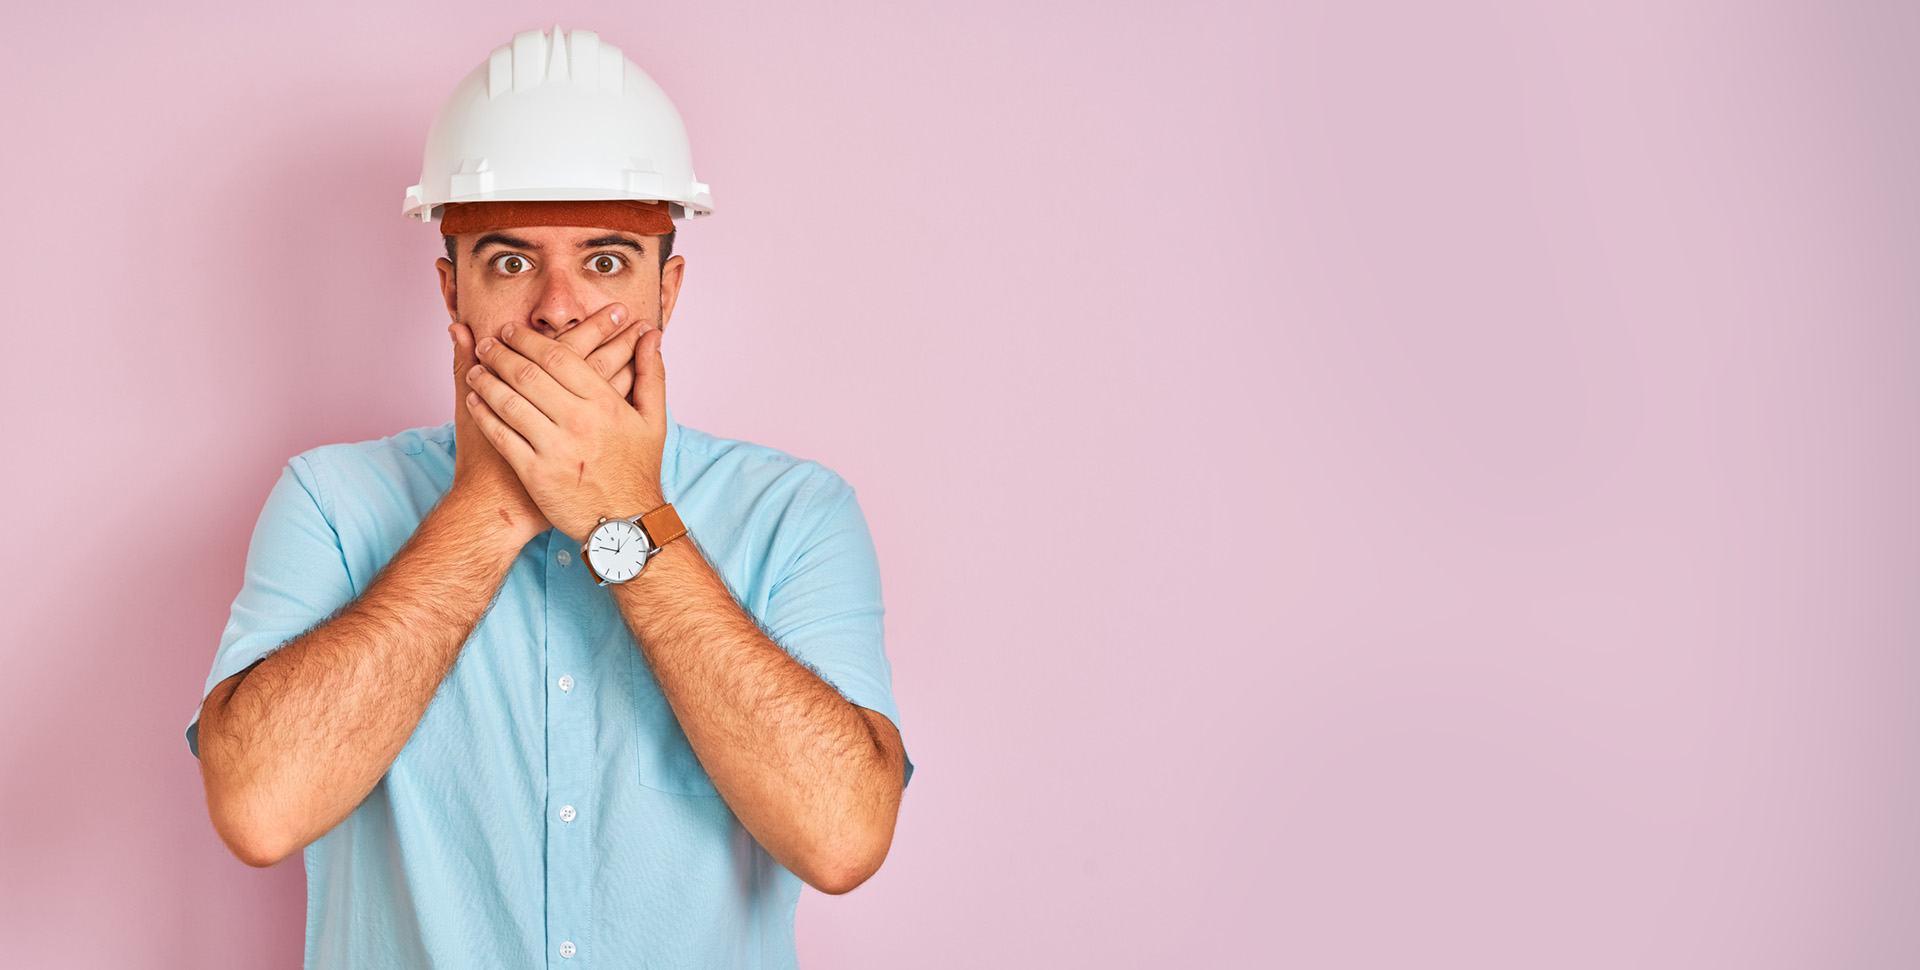 An image of a male worker with a light blue shirt and white hardhat standing in front of a light pink background. He is covering is mouth with both hands.